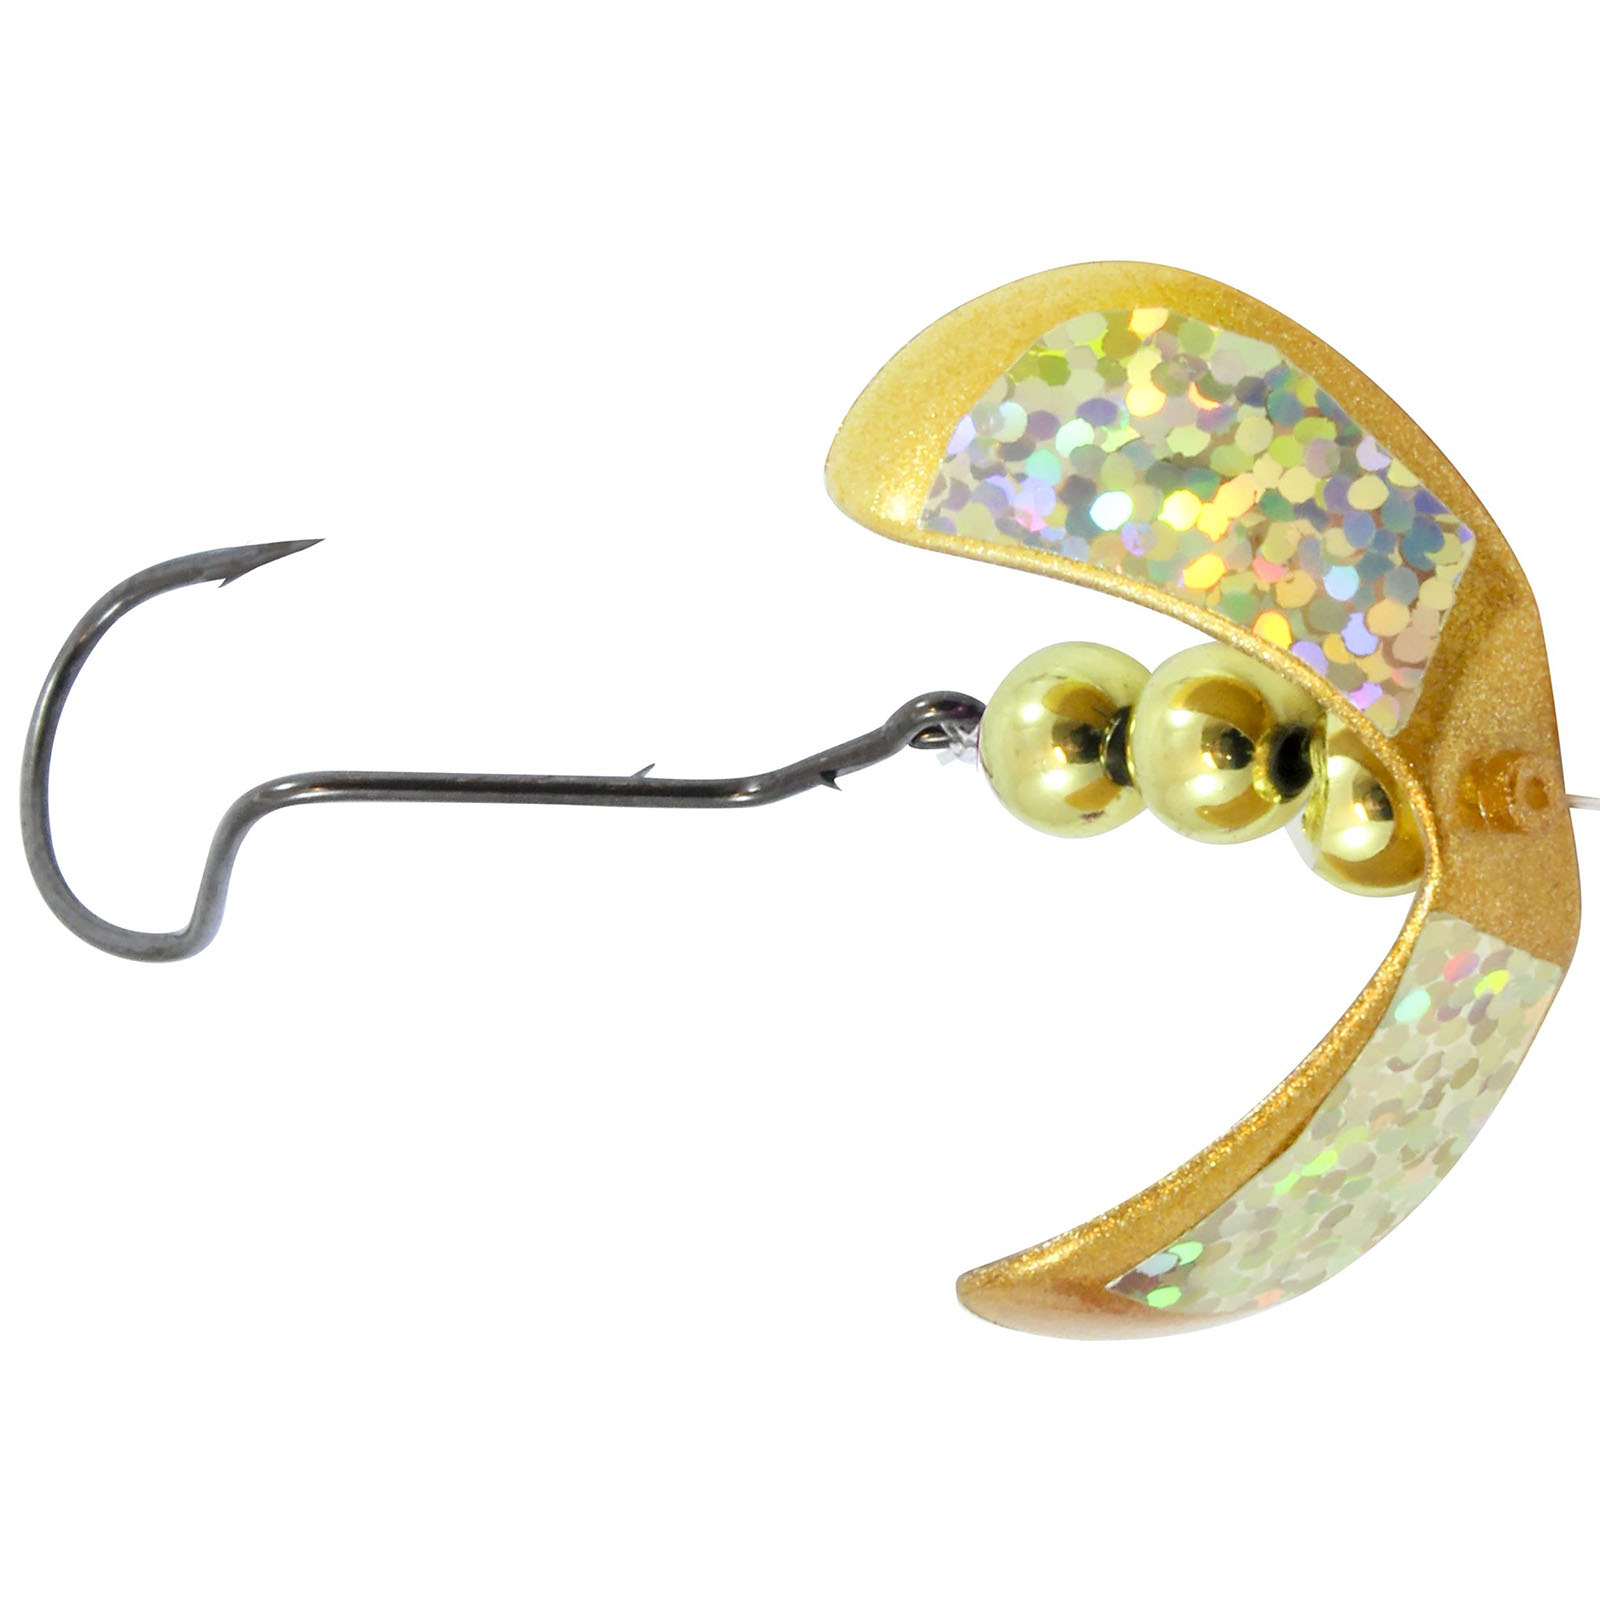 Northland Tackle Wingnut Butterfly Super Death® Rig